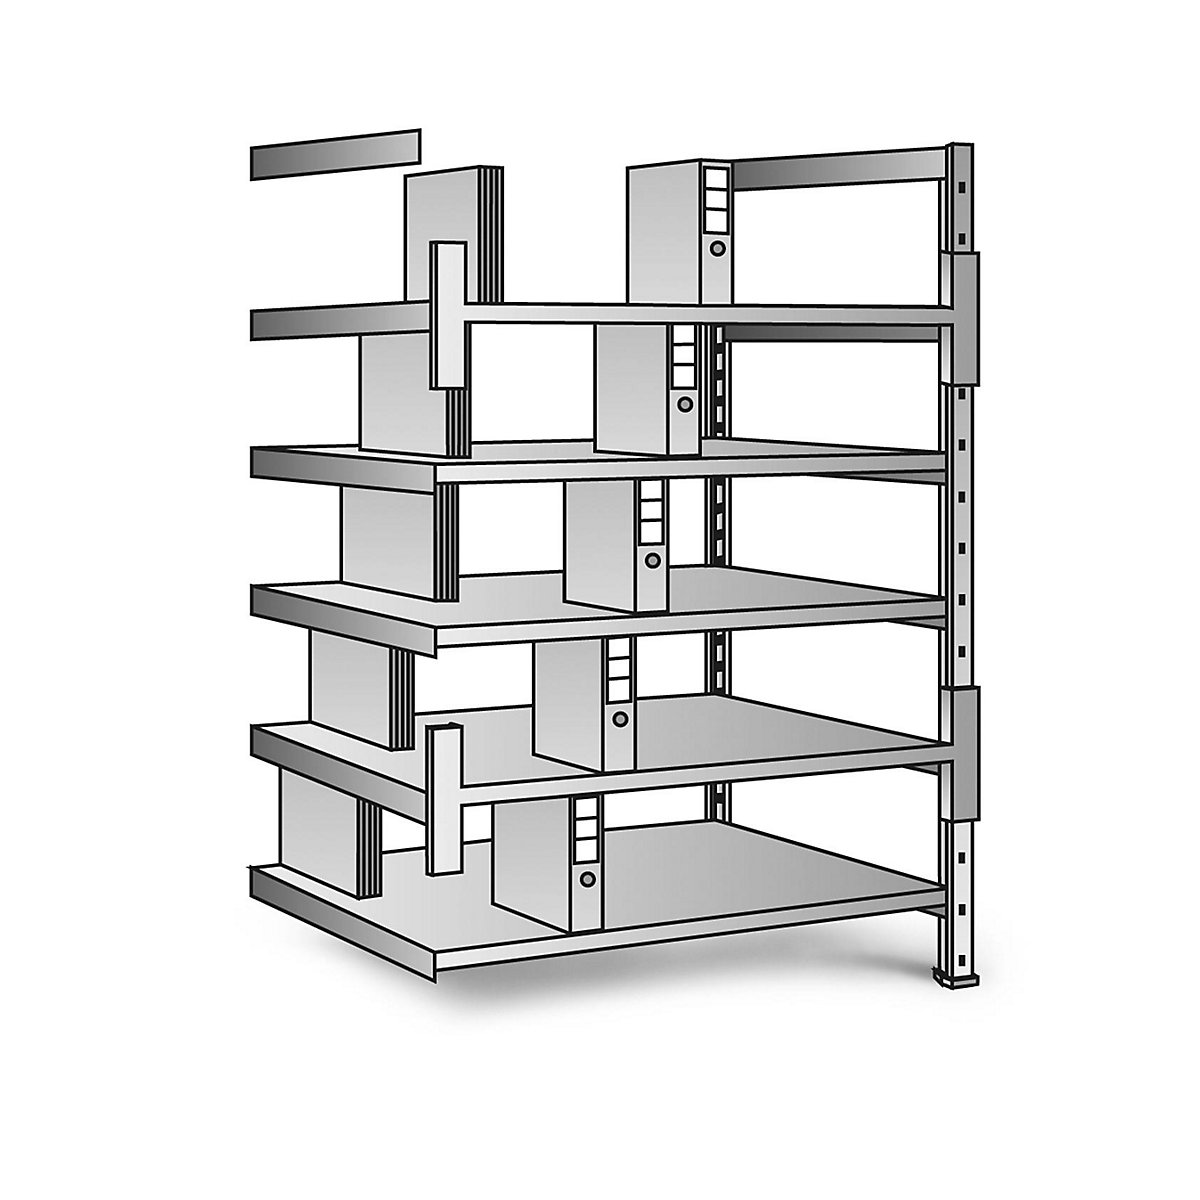 Boltless shelving units for files and archives, zinc plated, height 1920 mm, double sided, shelf WxD 1200 x 600 mm, extension shelf unit-5